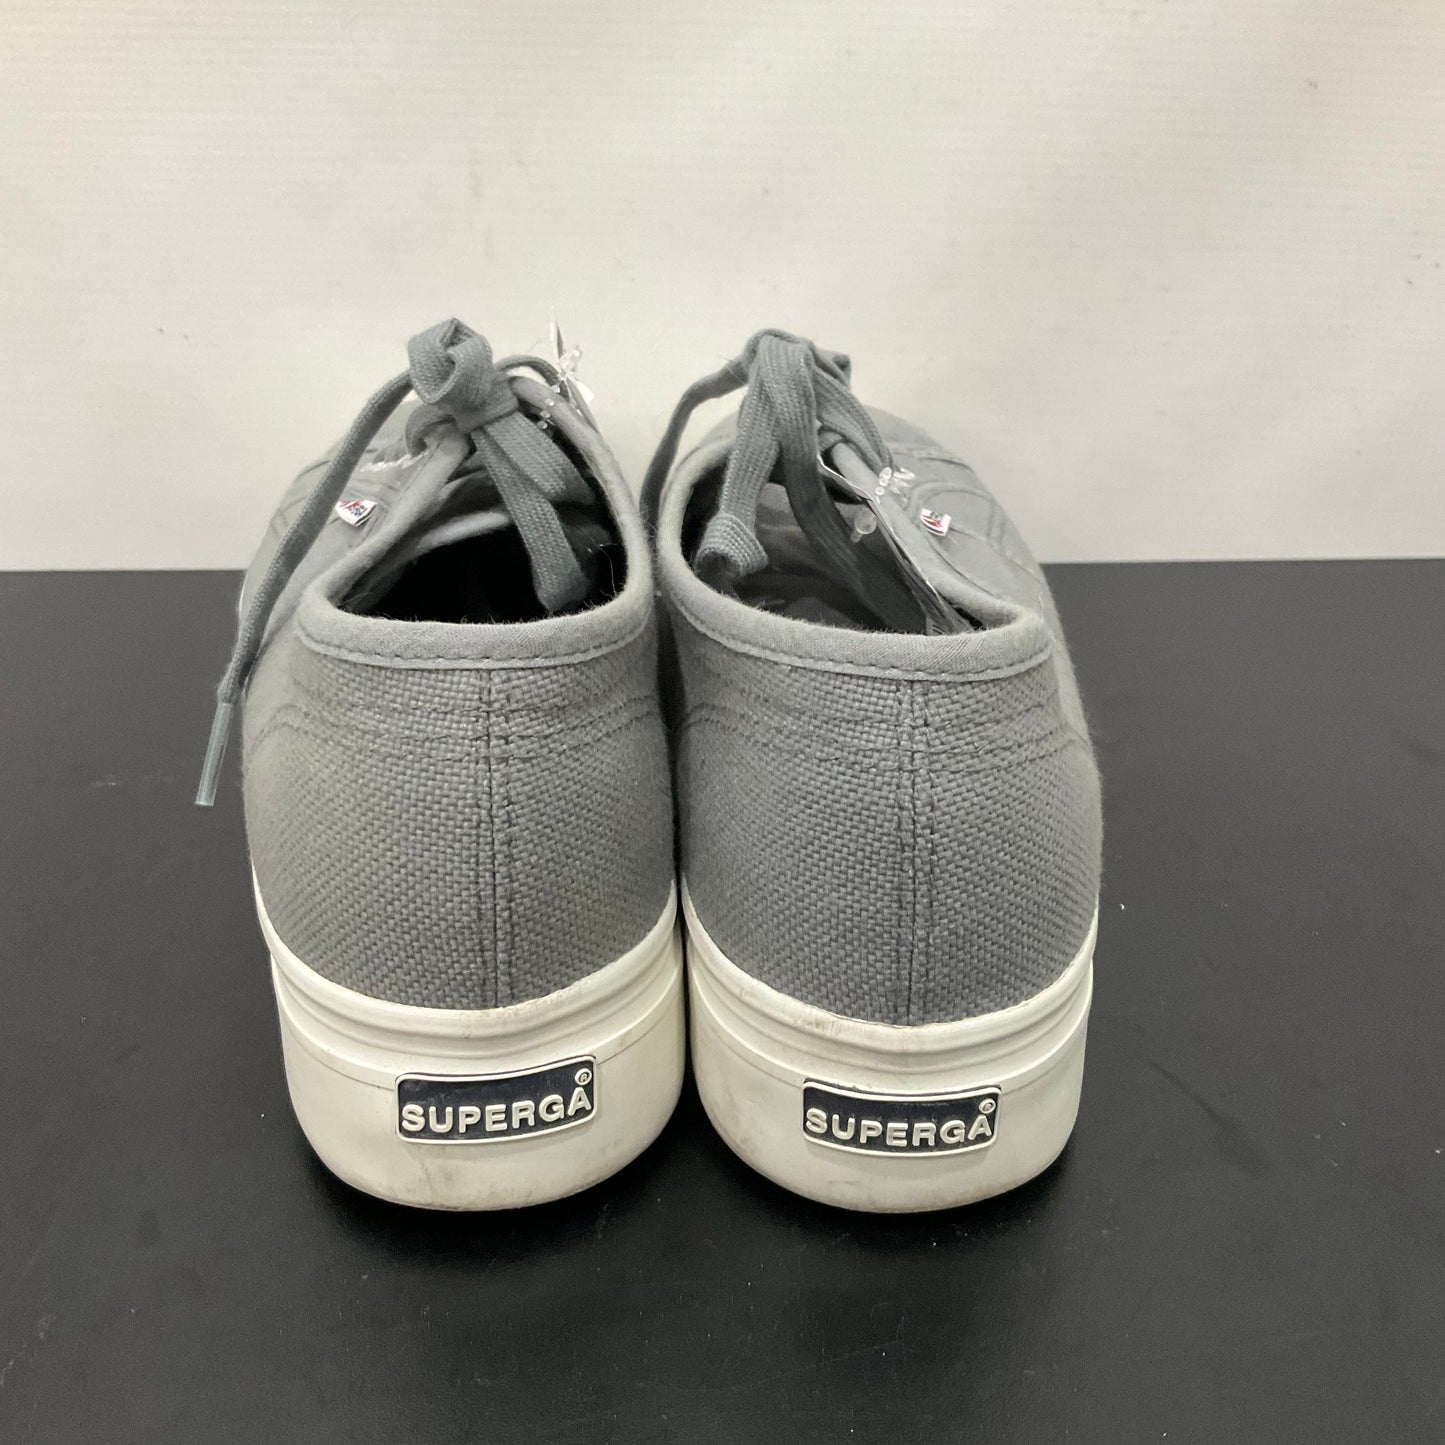 Grey Shoes Sneakers Superga, Size 9.5